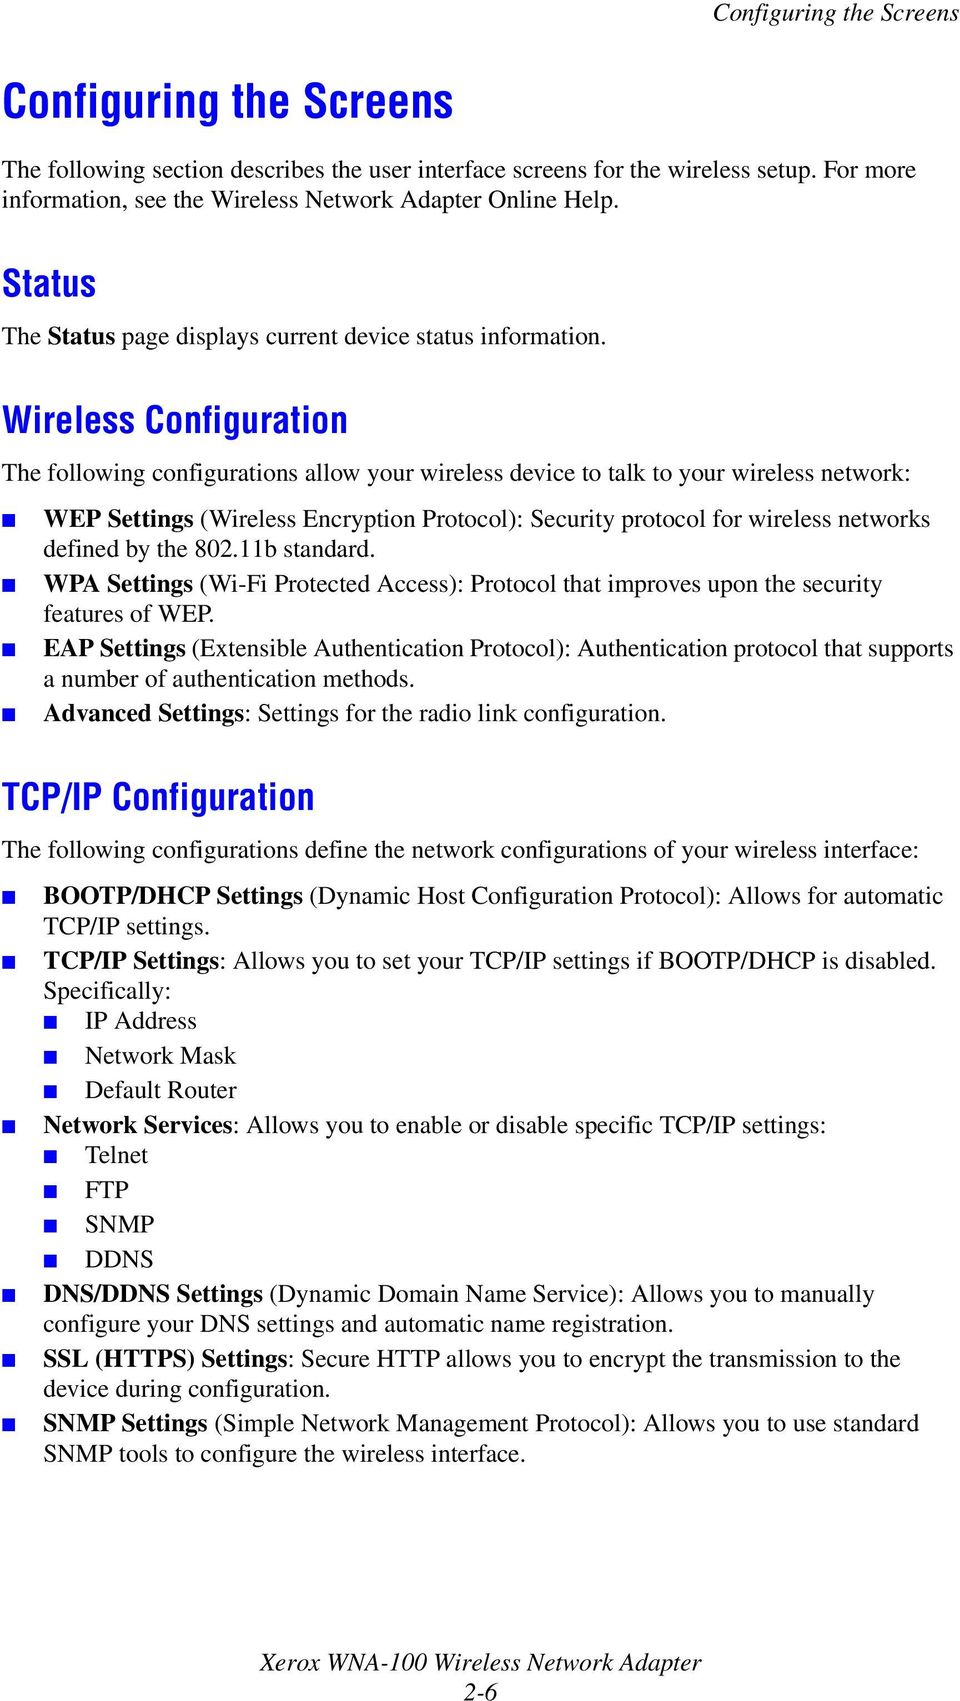 Wireless Configuration The following configurations allow your wireless device to talk to your wireless network: WEP Settings (Wireless Encryption Protocol): Security protocol for wireless networks